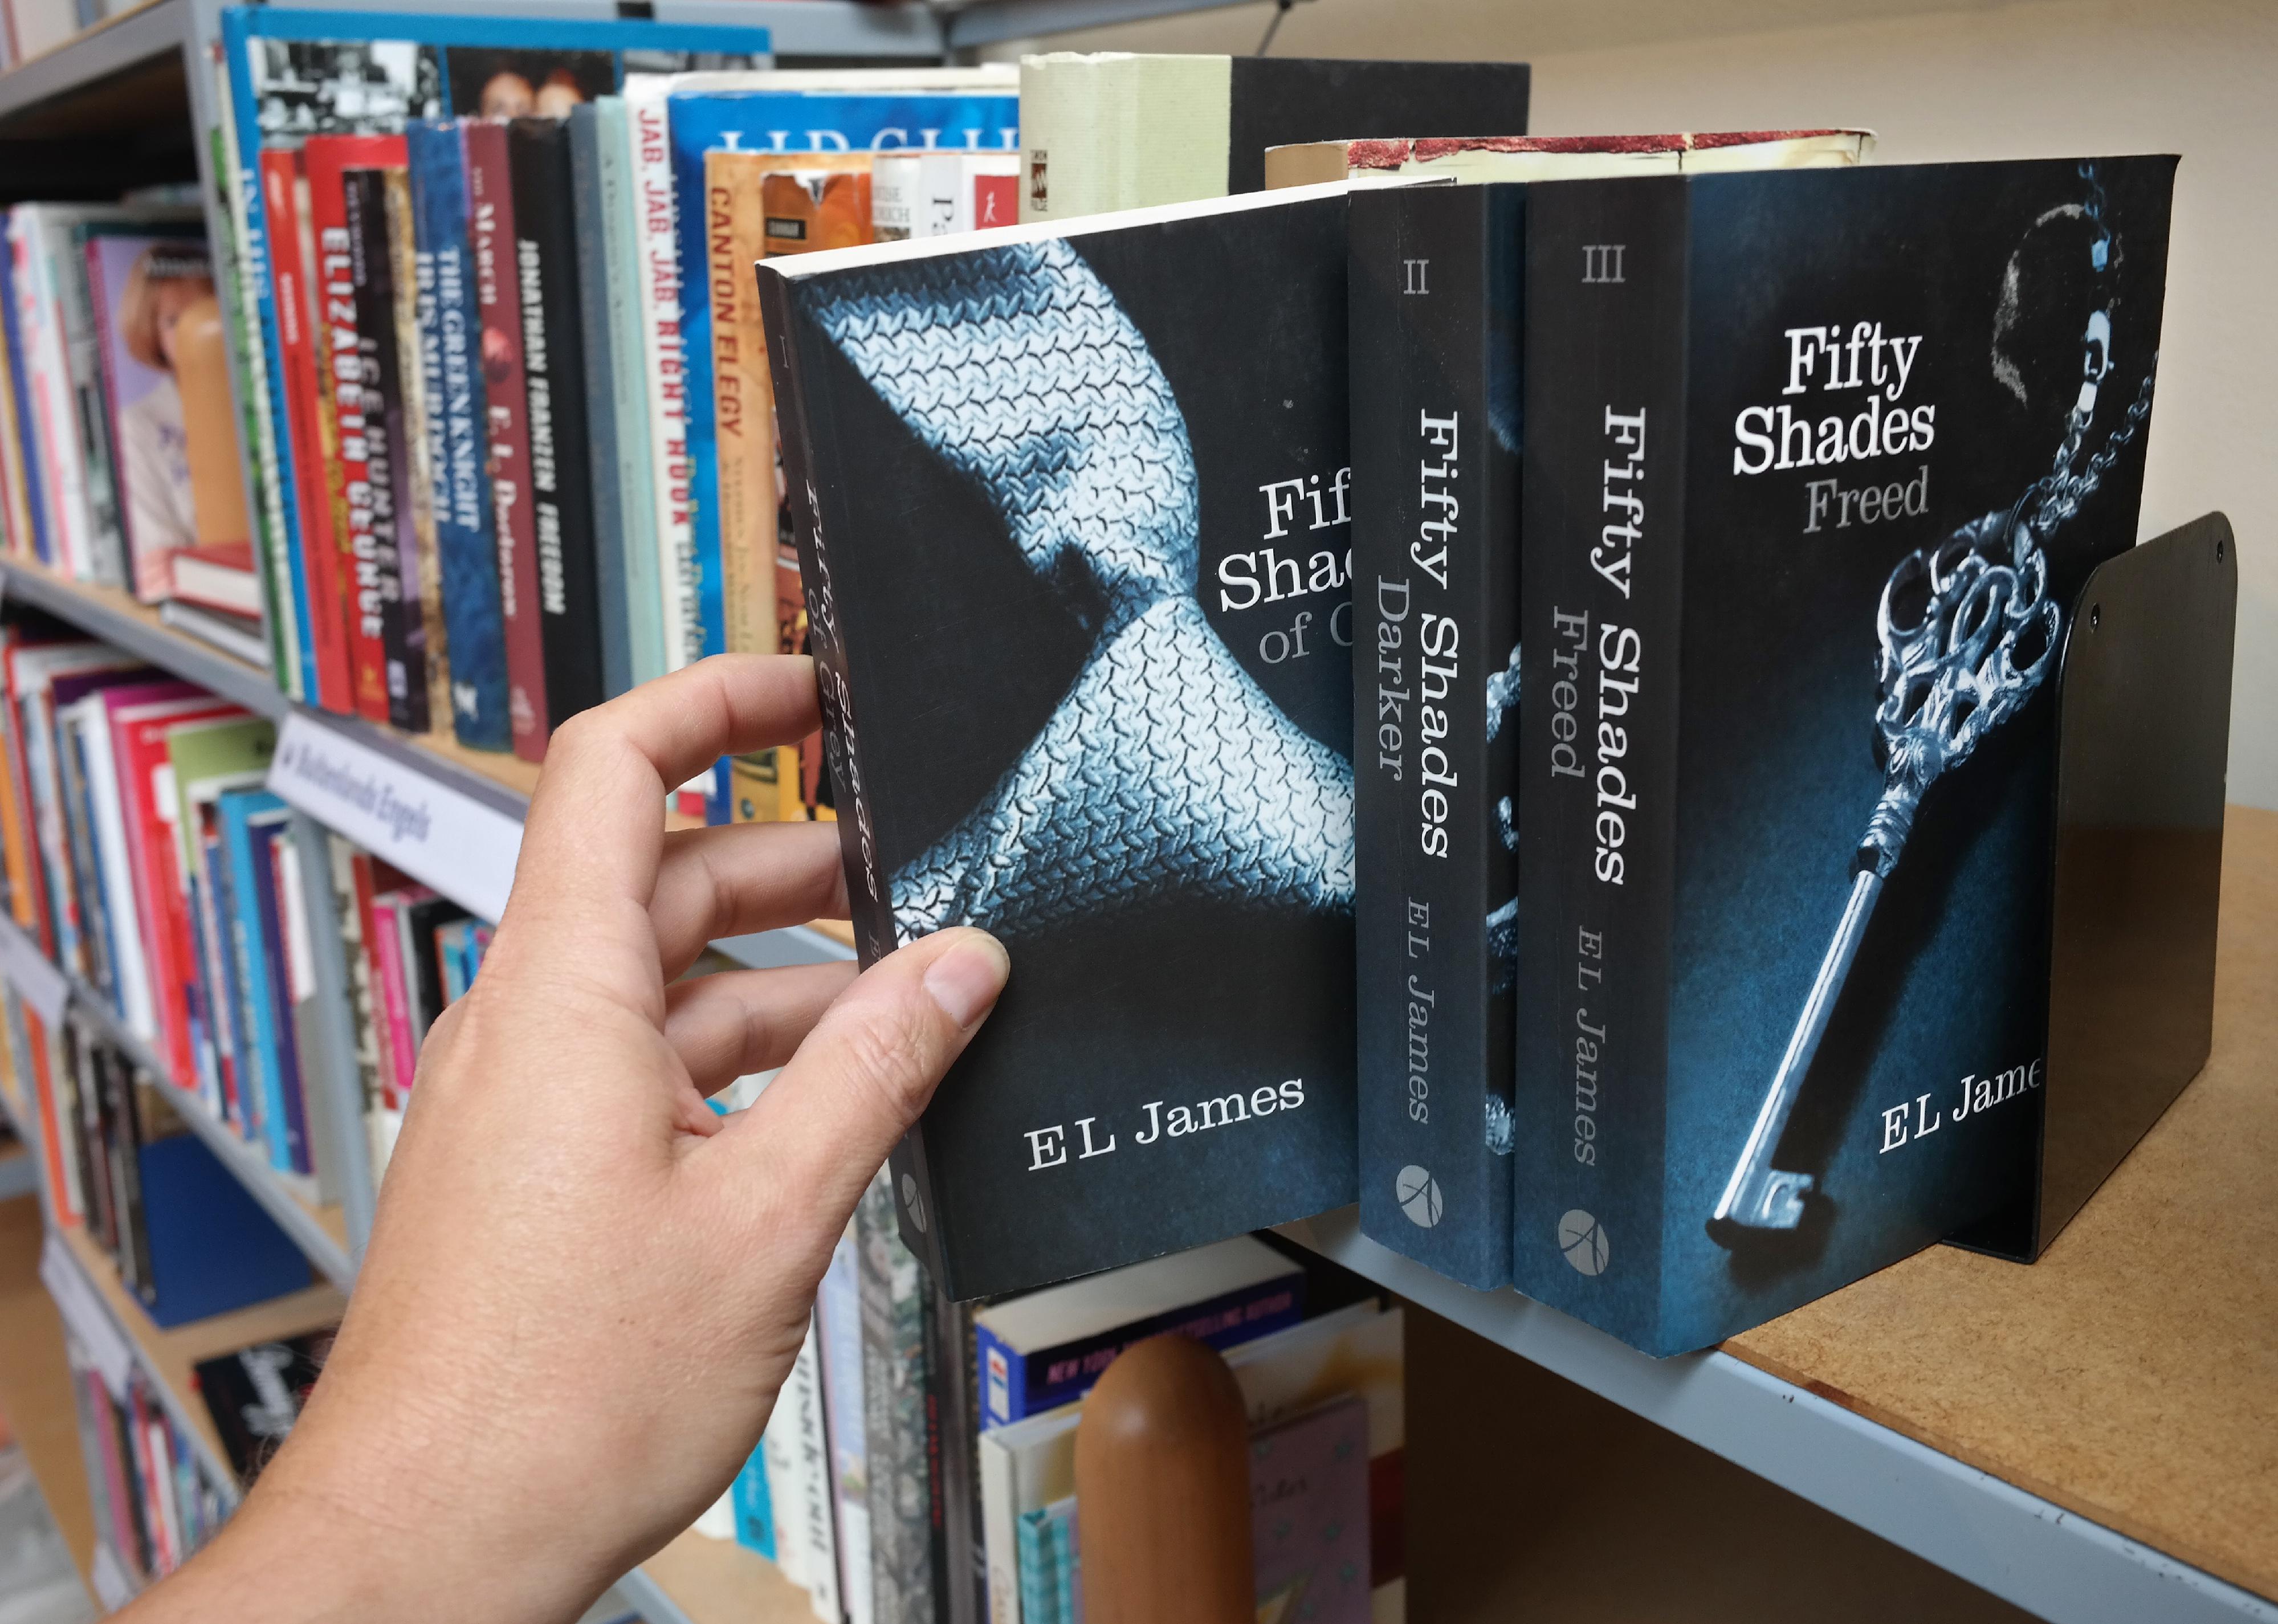 The Fifty Shades trilogy in a second hand store.